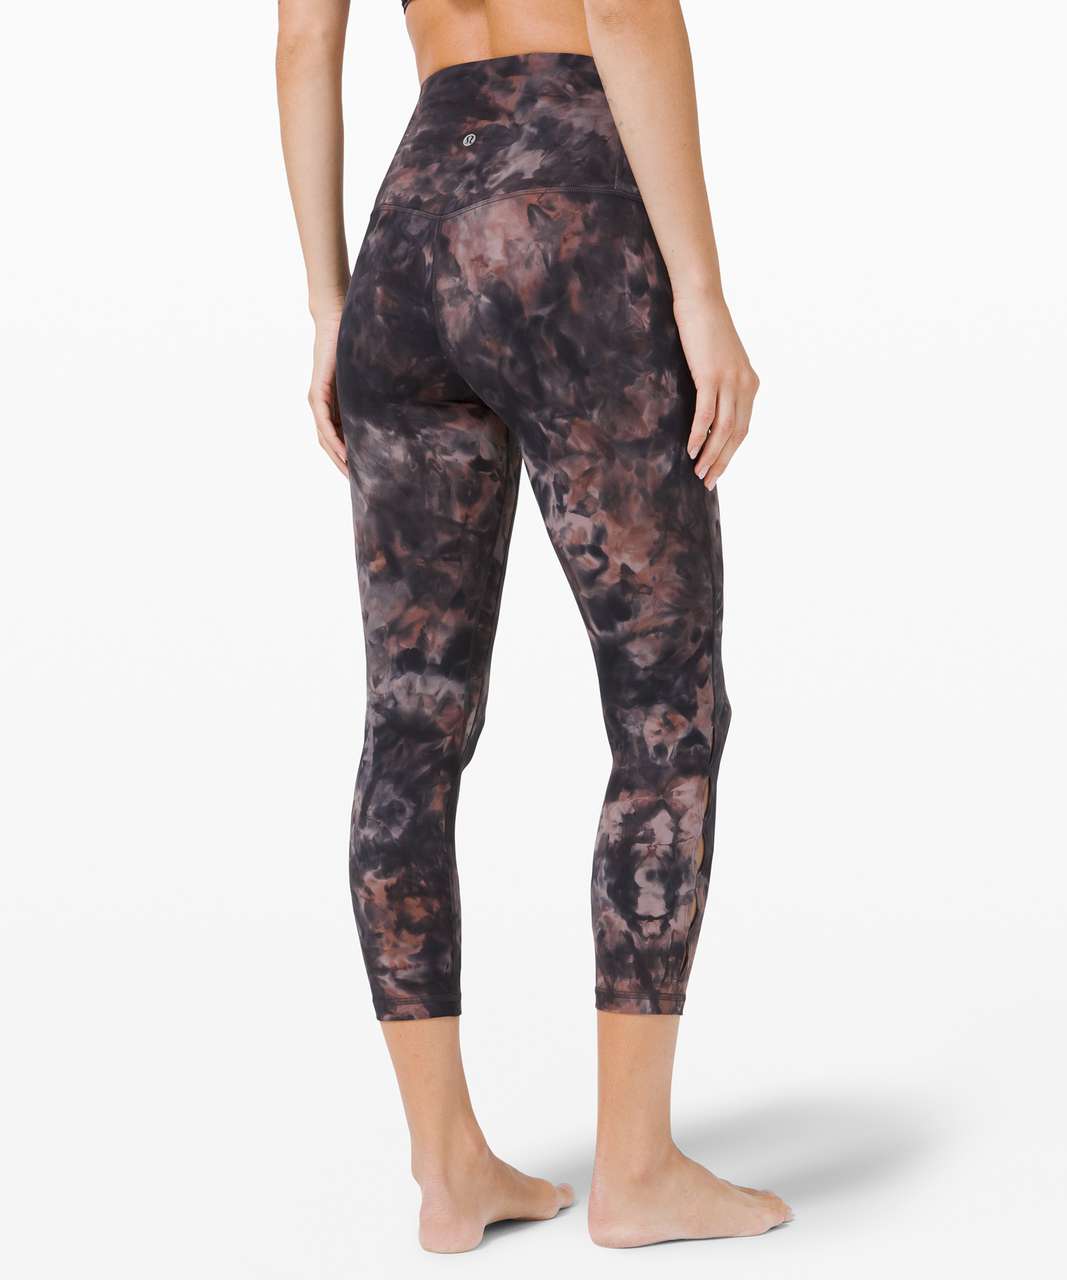 I love the Diamond Dye pieces Lululemon has been releasing lately